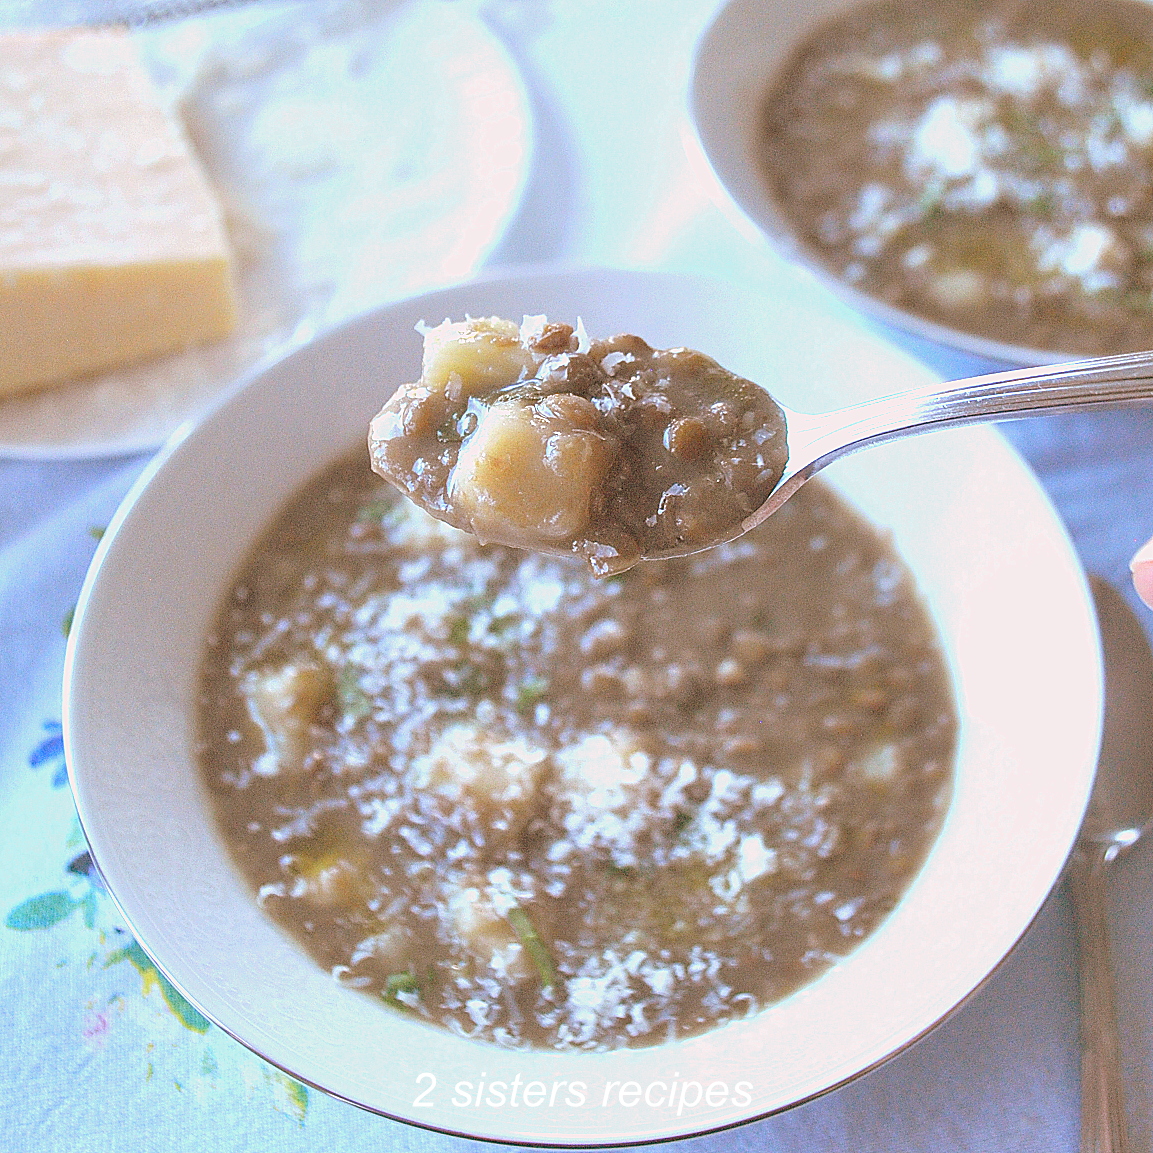 Hearty Lentil Soup by 2sistersrecipes.com